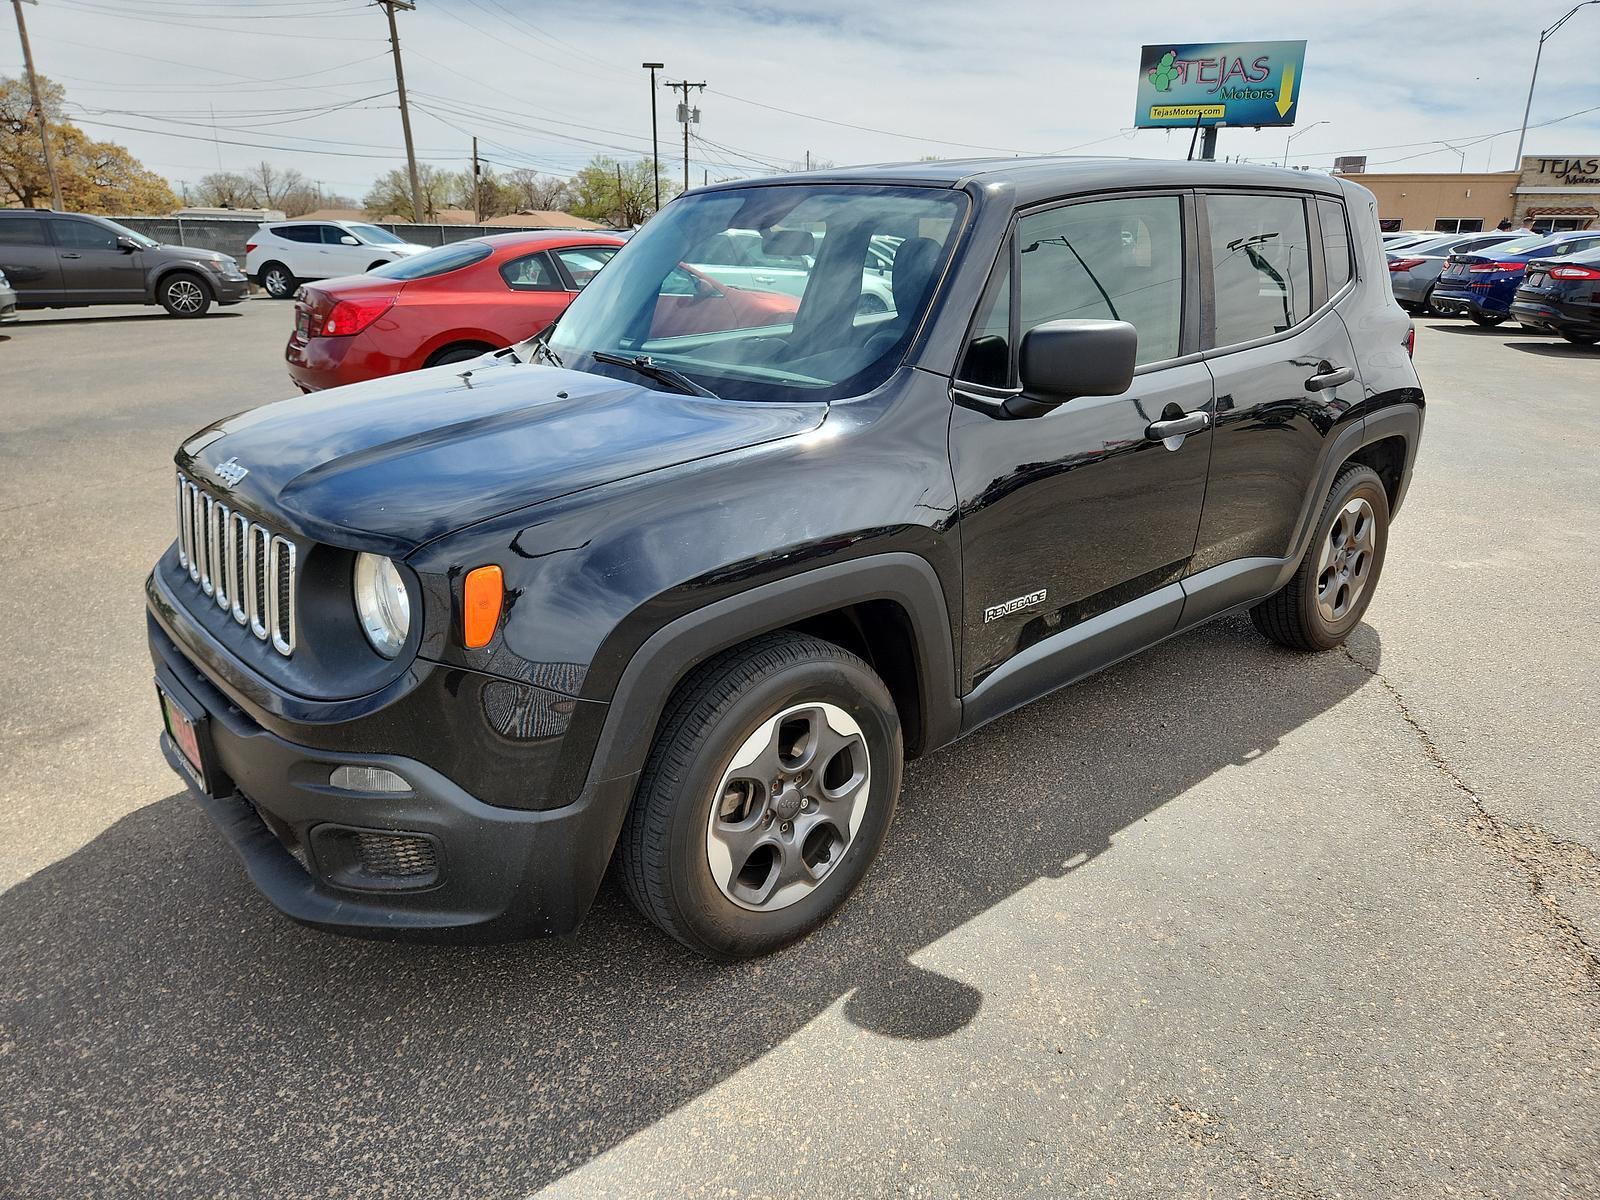 2015 BLACK JEEP RENEGADE SPORT (ZACCJAAT0FP) , located at 4110 Avenue Q, Lubbock, 79412, 33.556553, -101.855820 - Photo #1